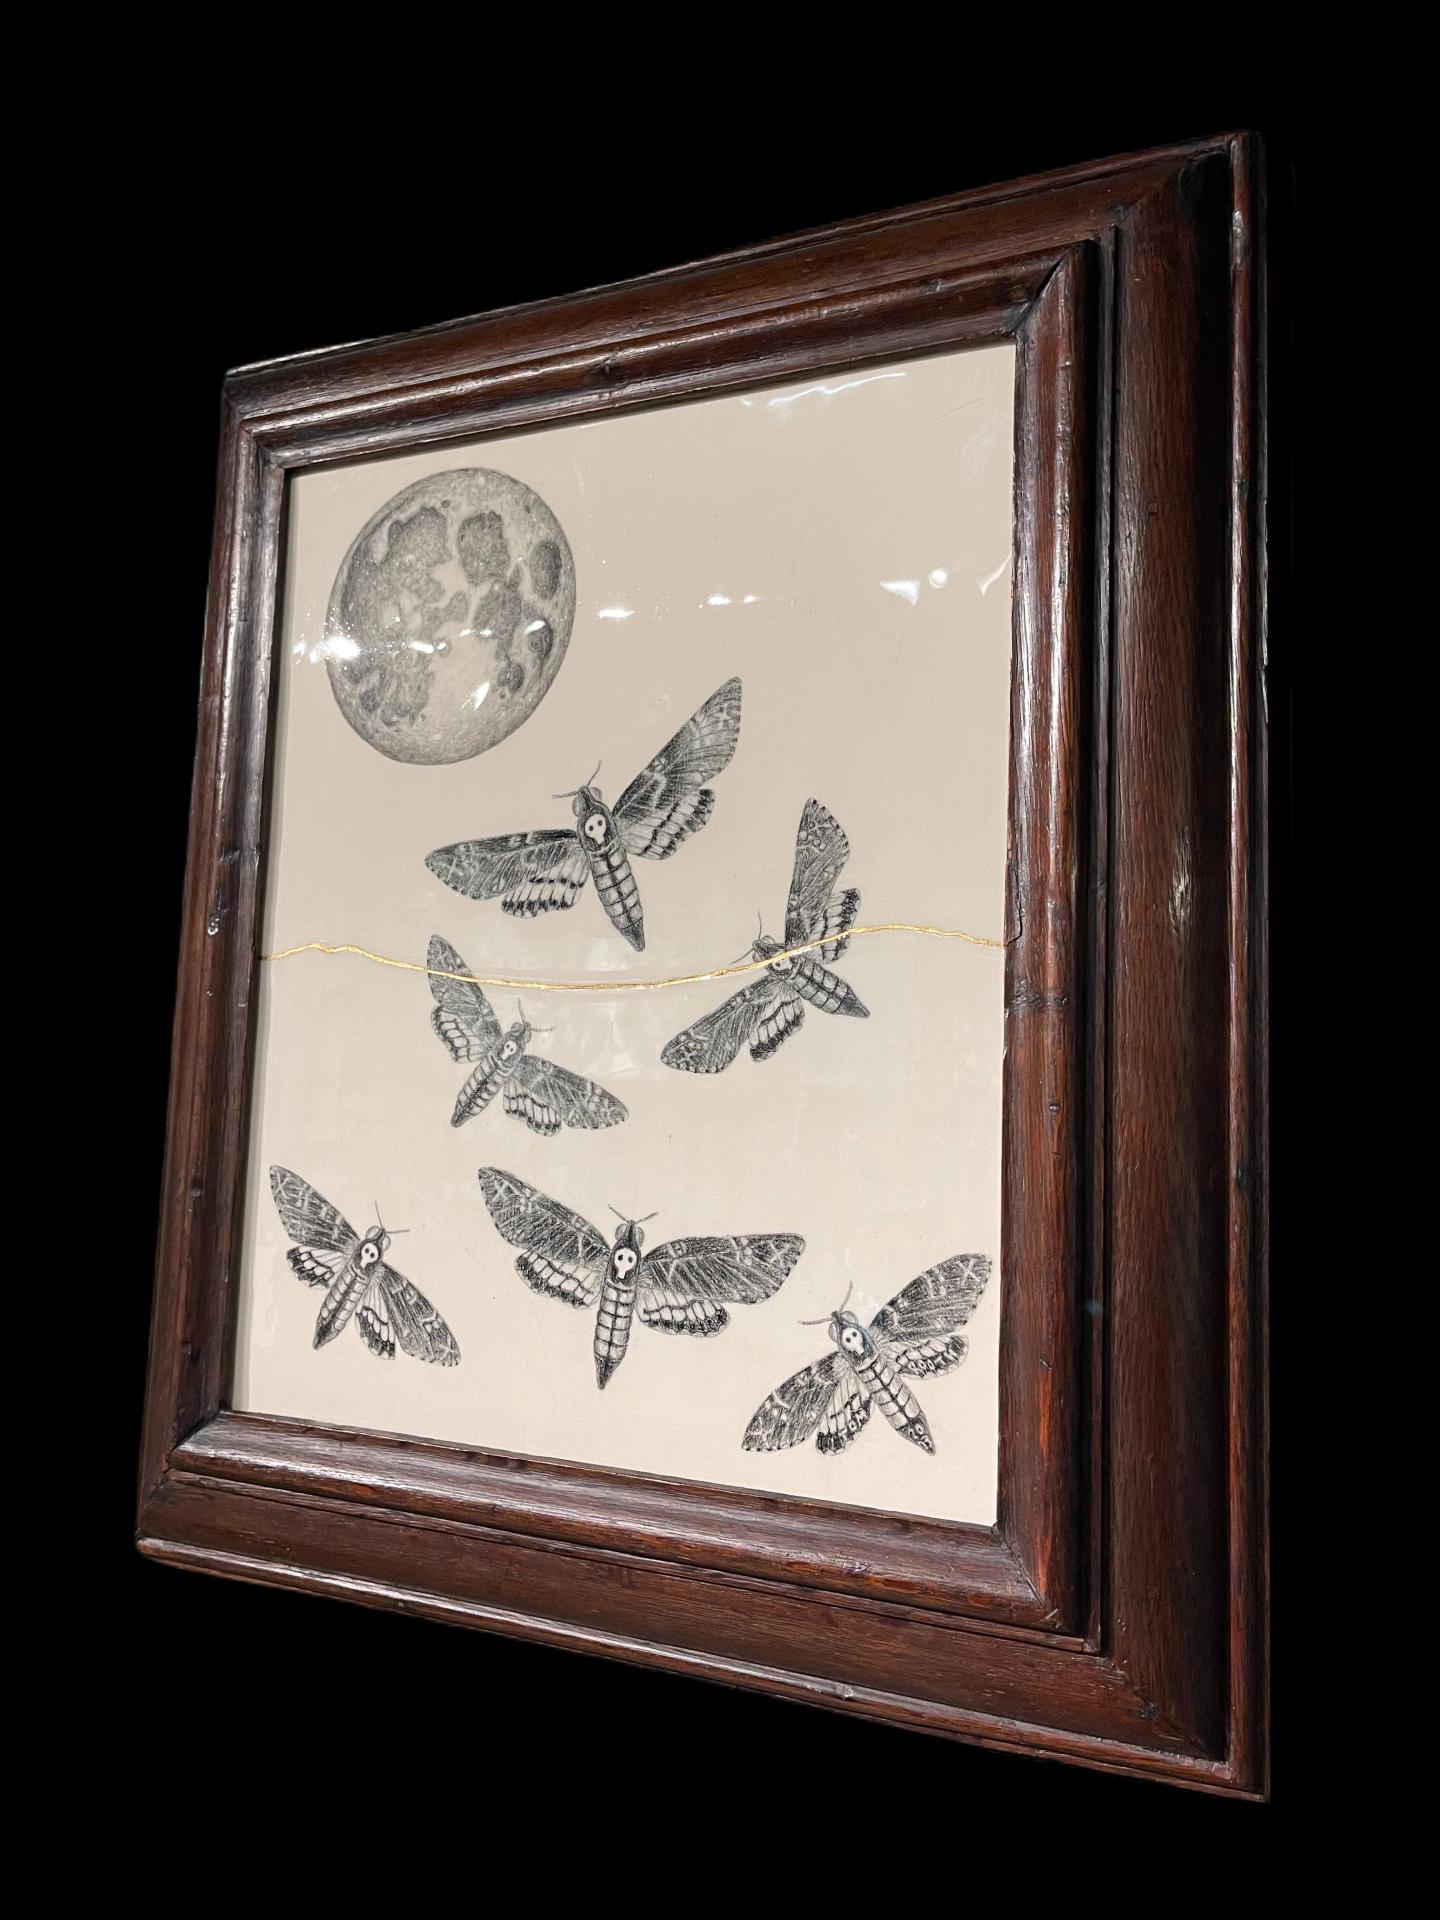 Death's head moths under a full-moon, presented in a hand-carved c1880 oak frame - Realist Mixed Media Art by Tom Rooth